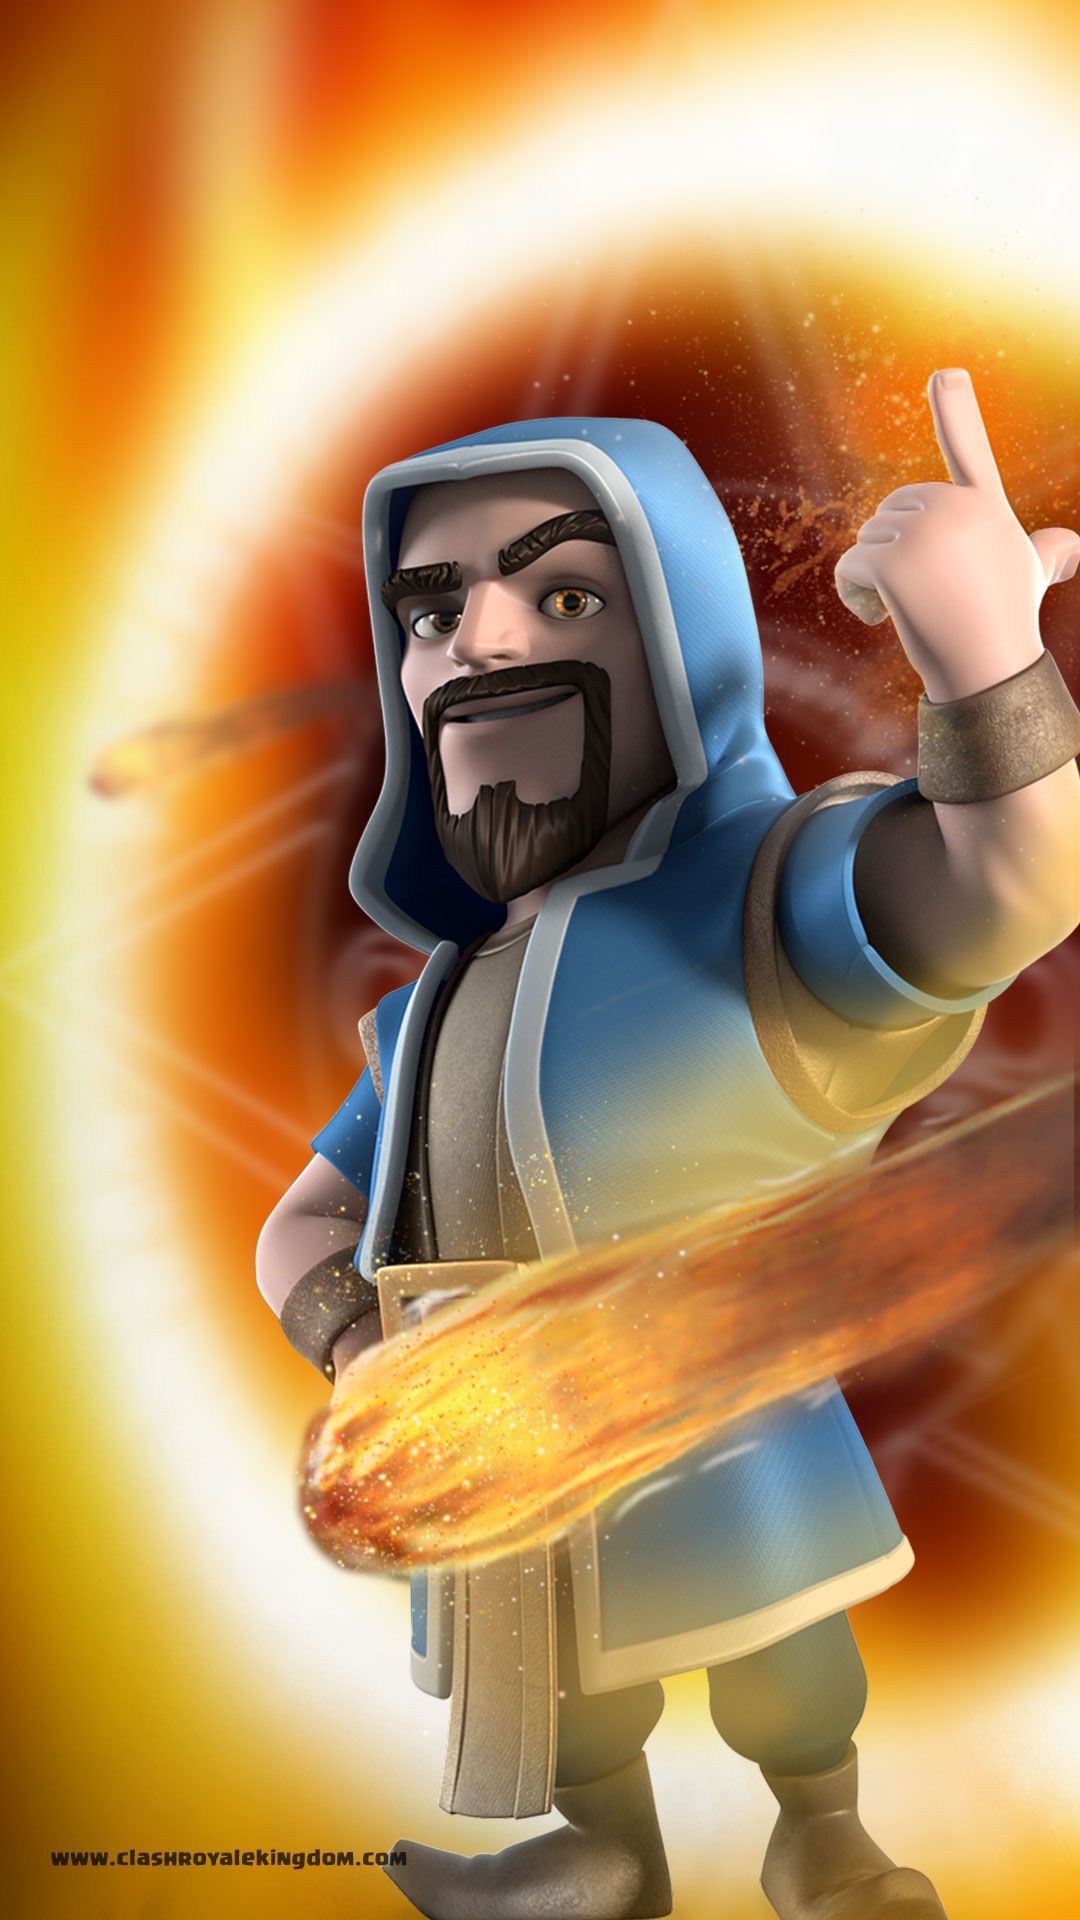 Wizard Wallpaper iPhone. Clash royale wallpaper, Clash royale, Clash of clans